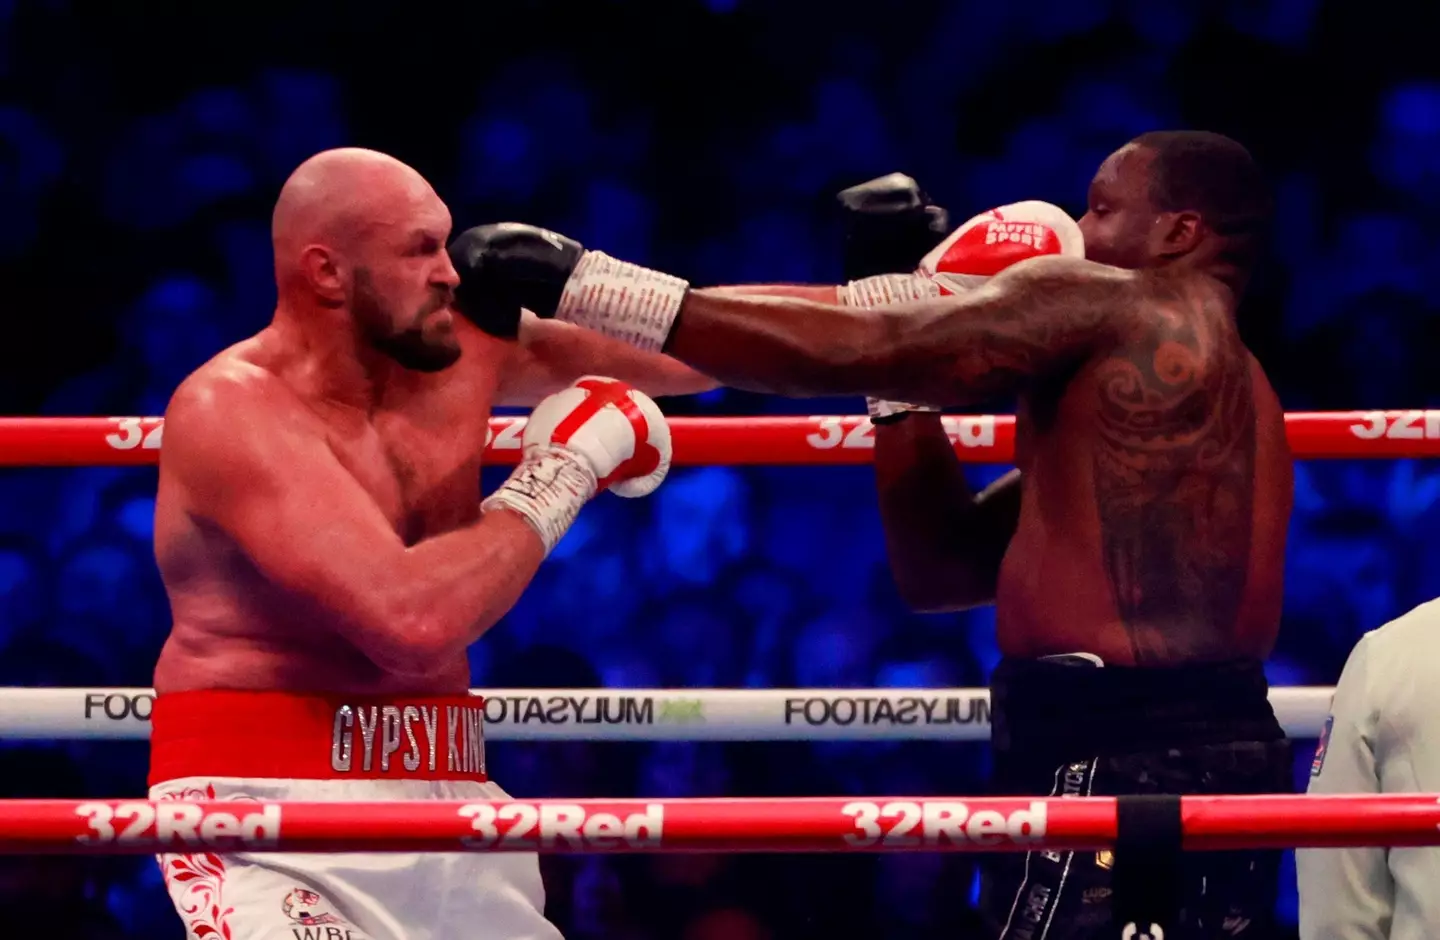 Fury announced his retirement from professional boxing after beating Dillian Whyte in April (Image: Alamy)